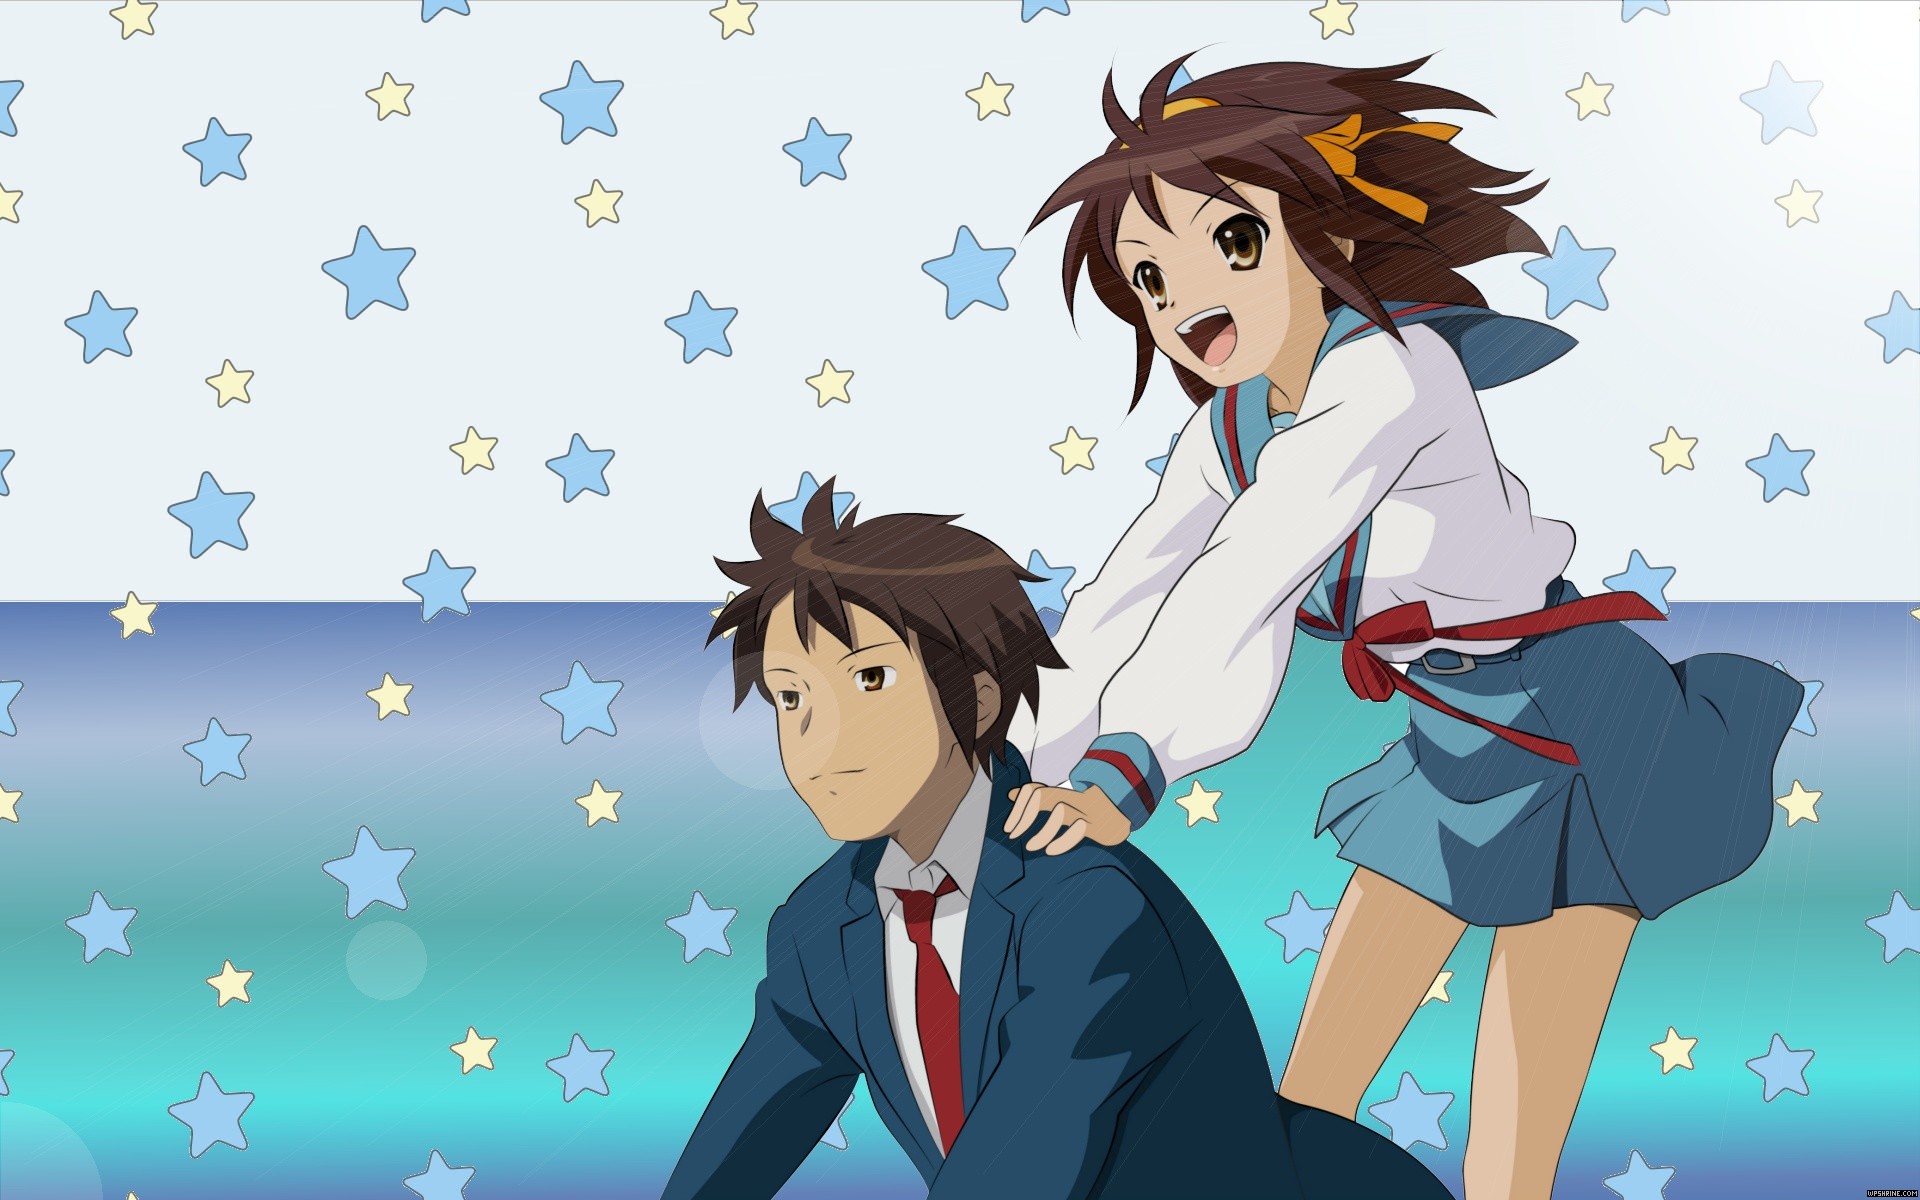 1920x1200 Haruhi & Kyon - Click image for bigger size and better quality